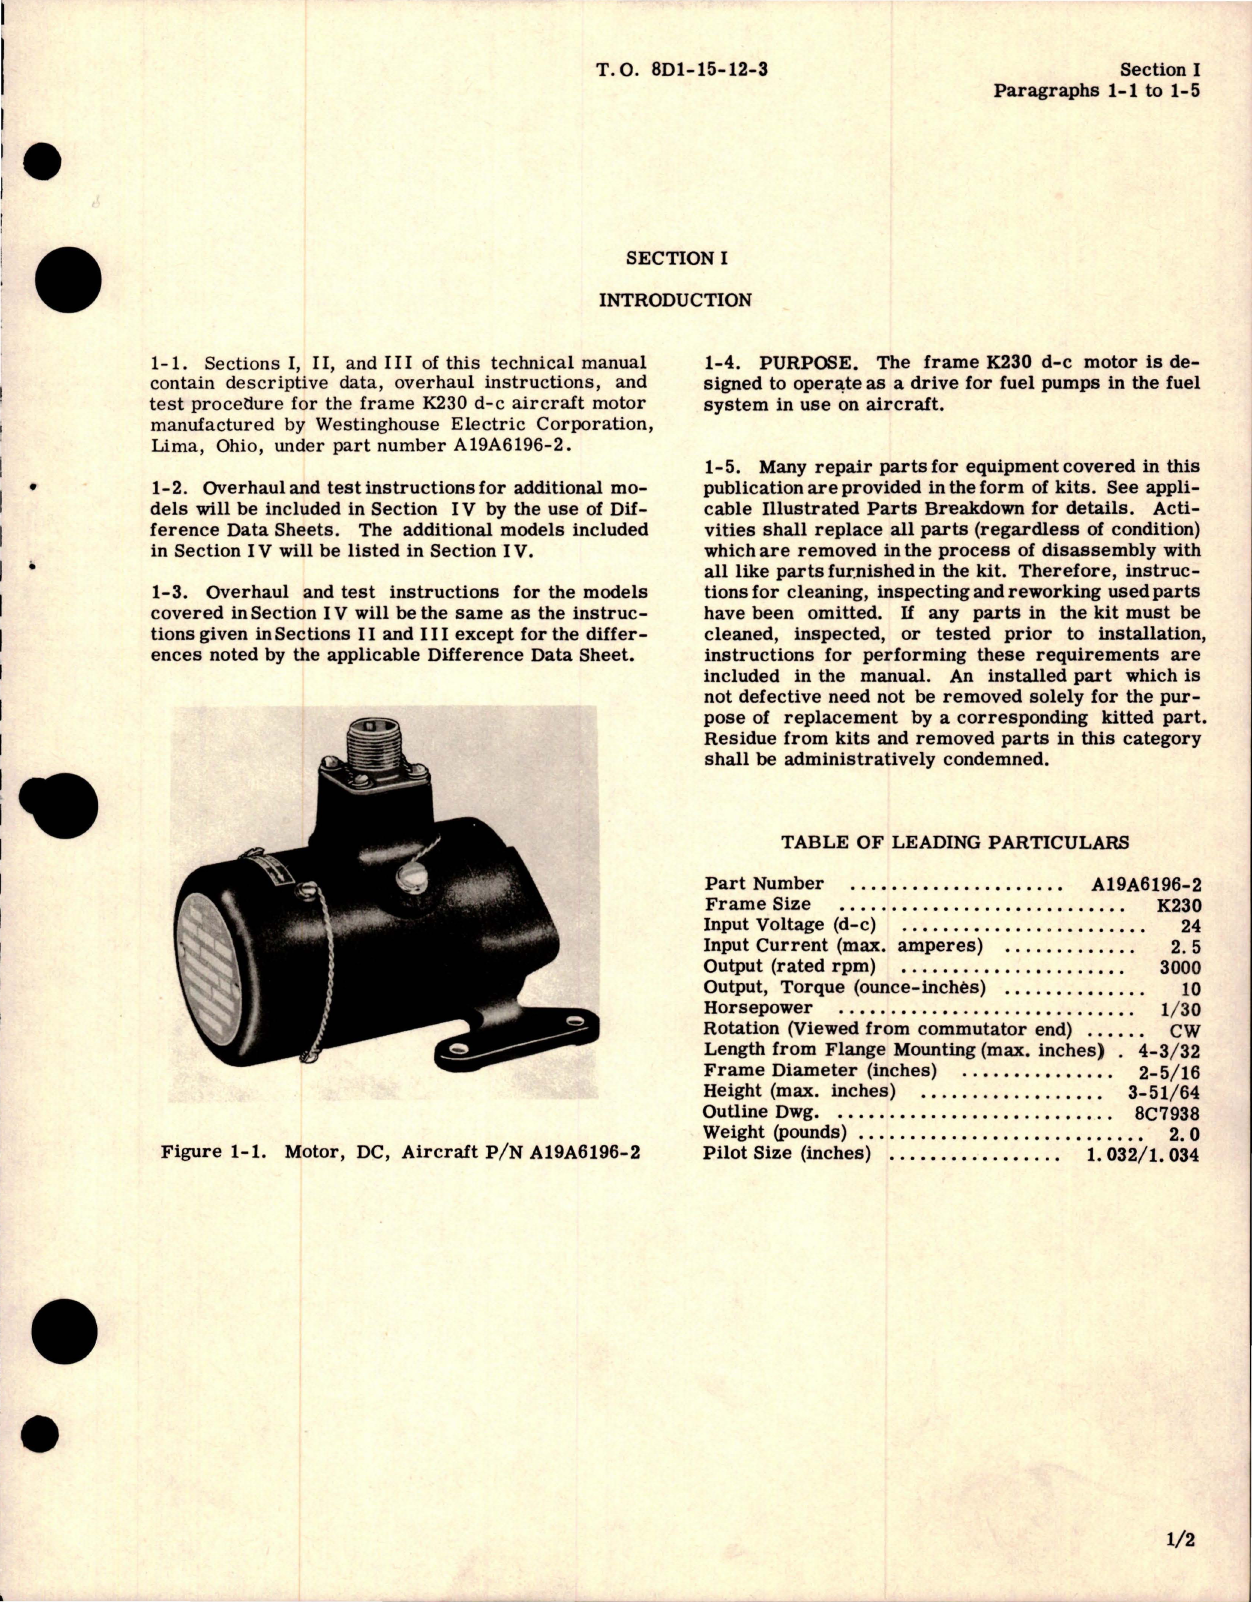 Sample page 5 from AirCorps Library document: Overhaul Instructions for DC Motor - Part A19A6196-2